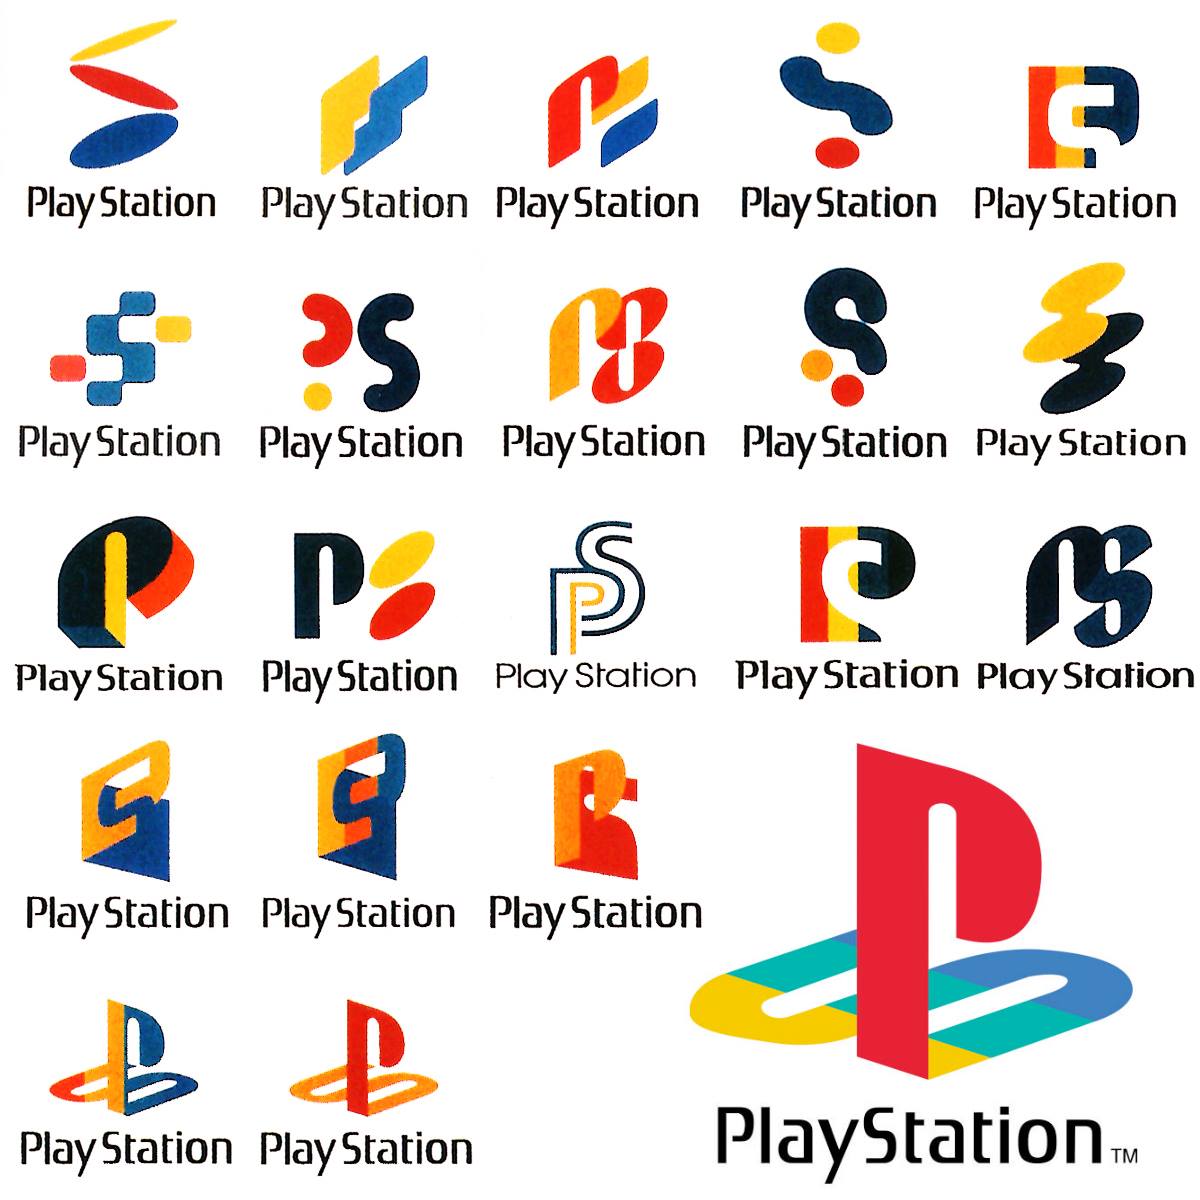 Old Sony Logo - Early Playstation Logo Concepts released